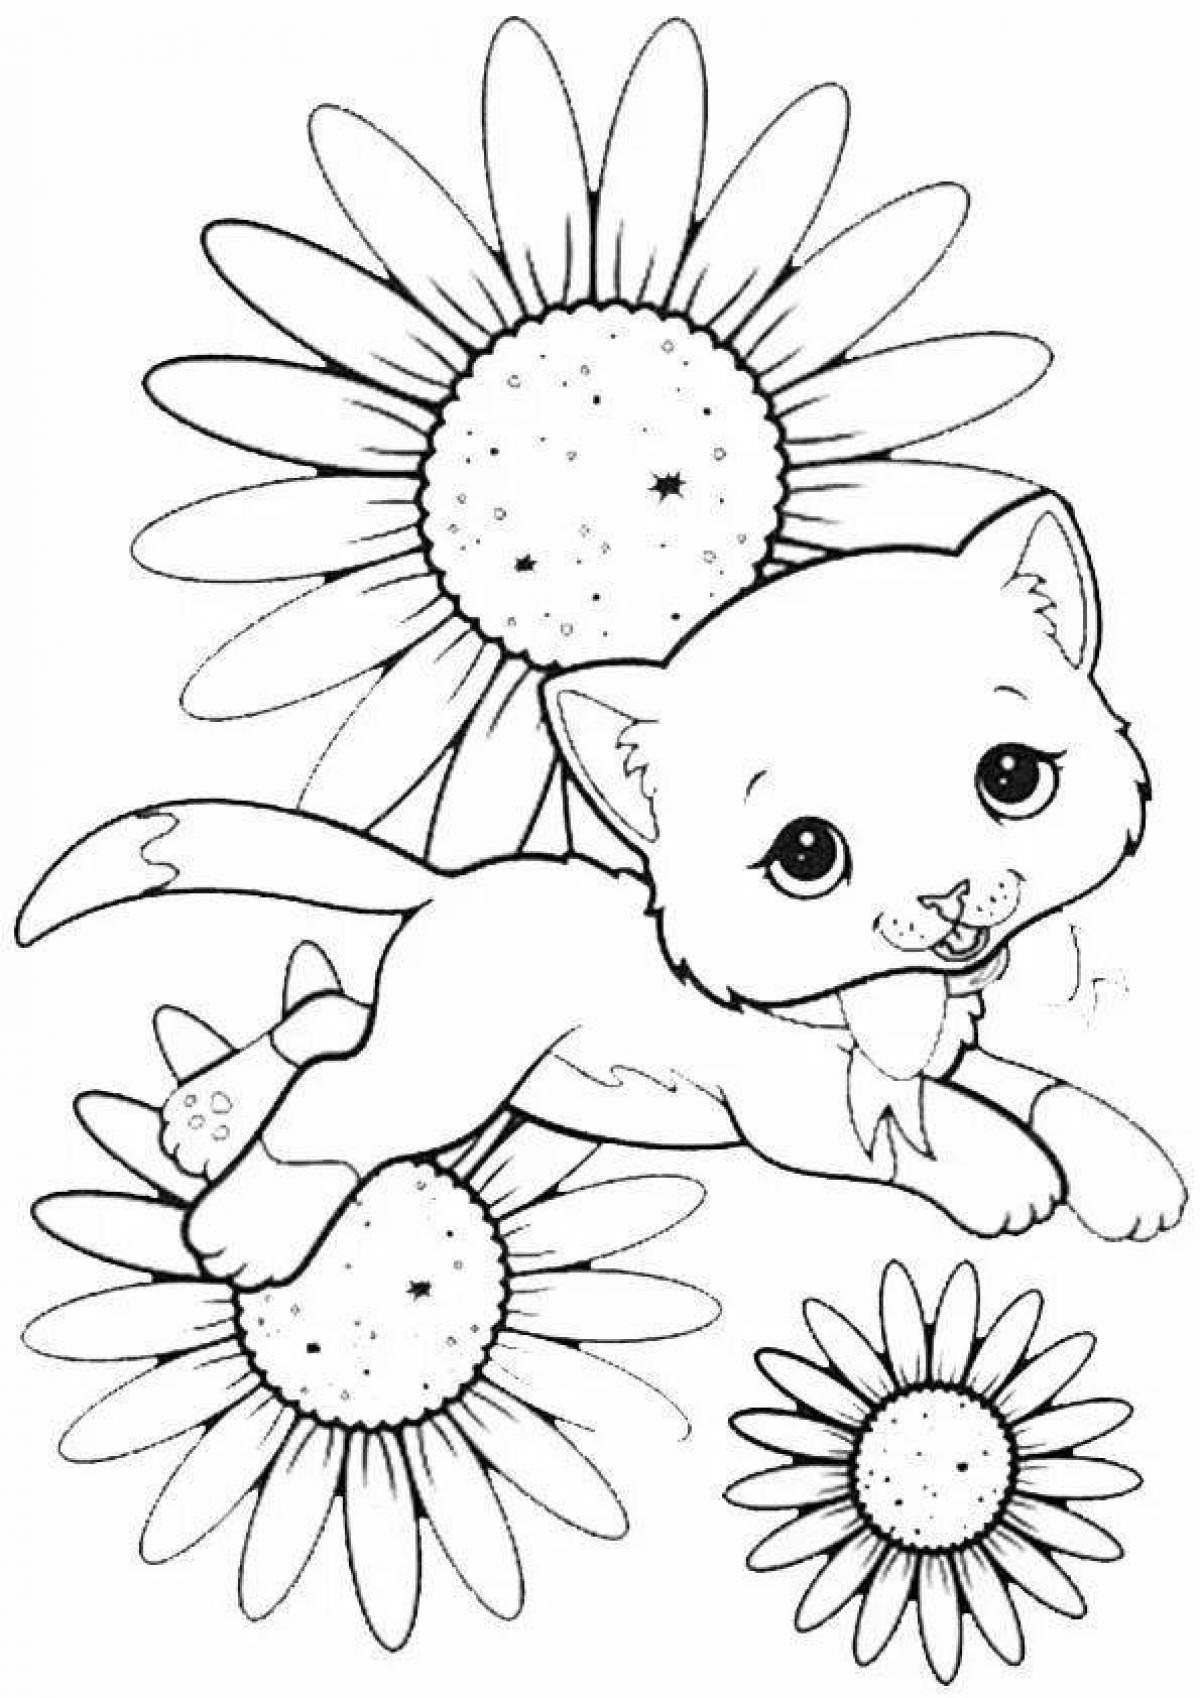 Violent kittens and puppies coloring book